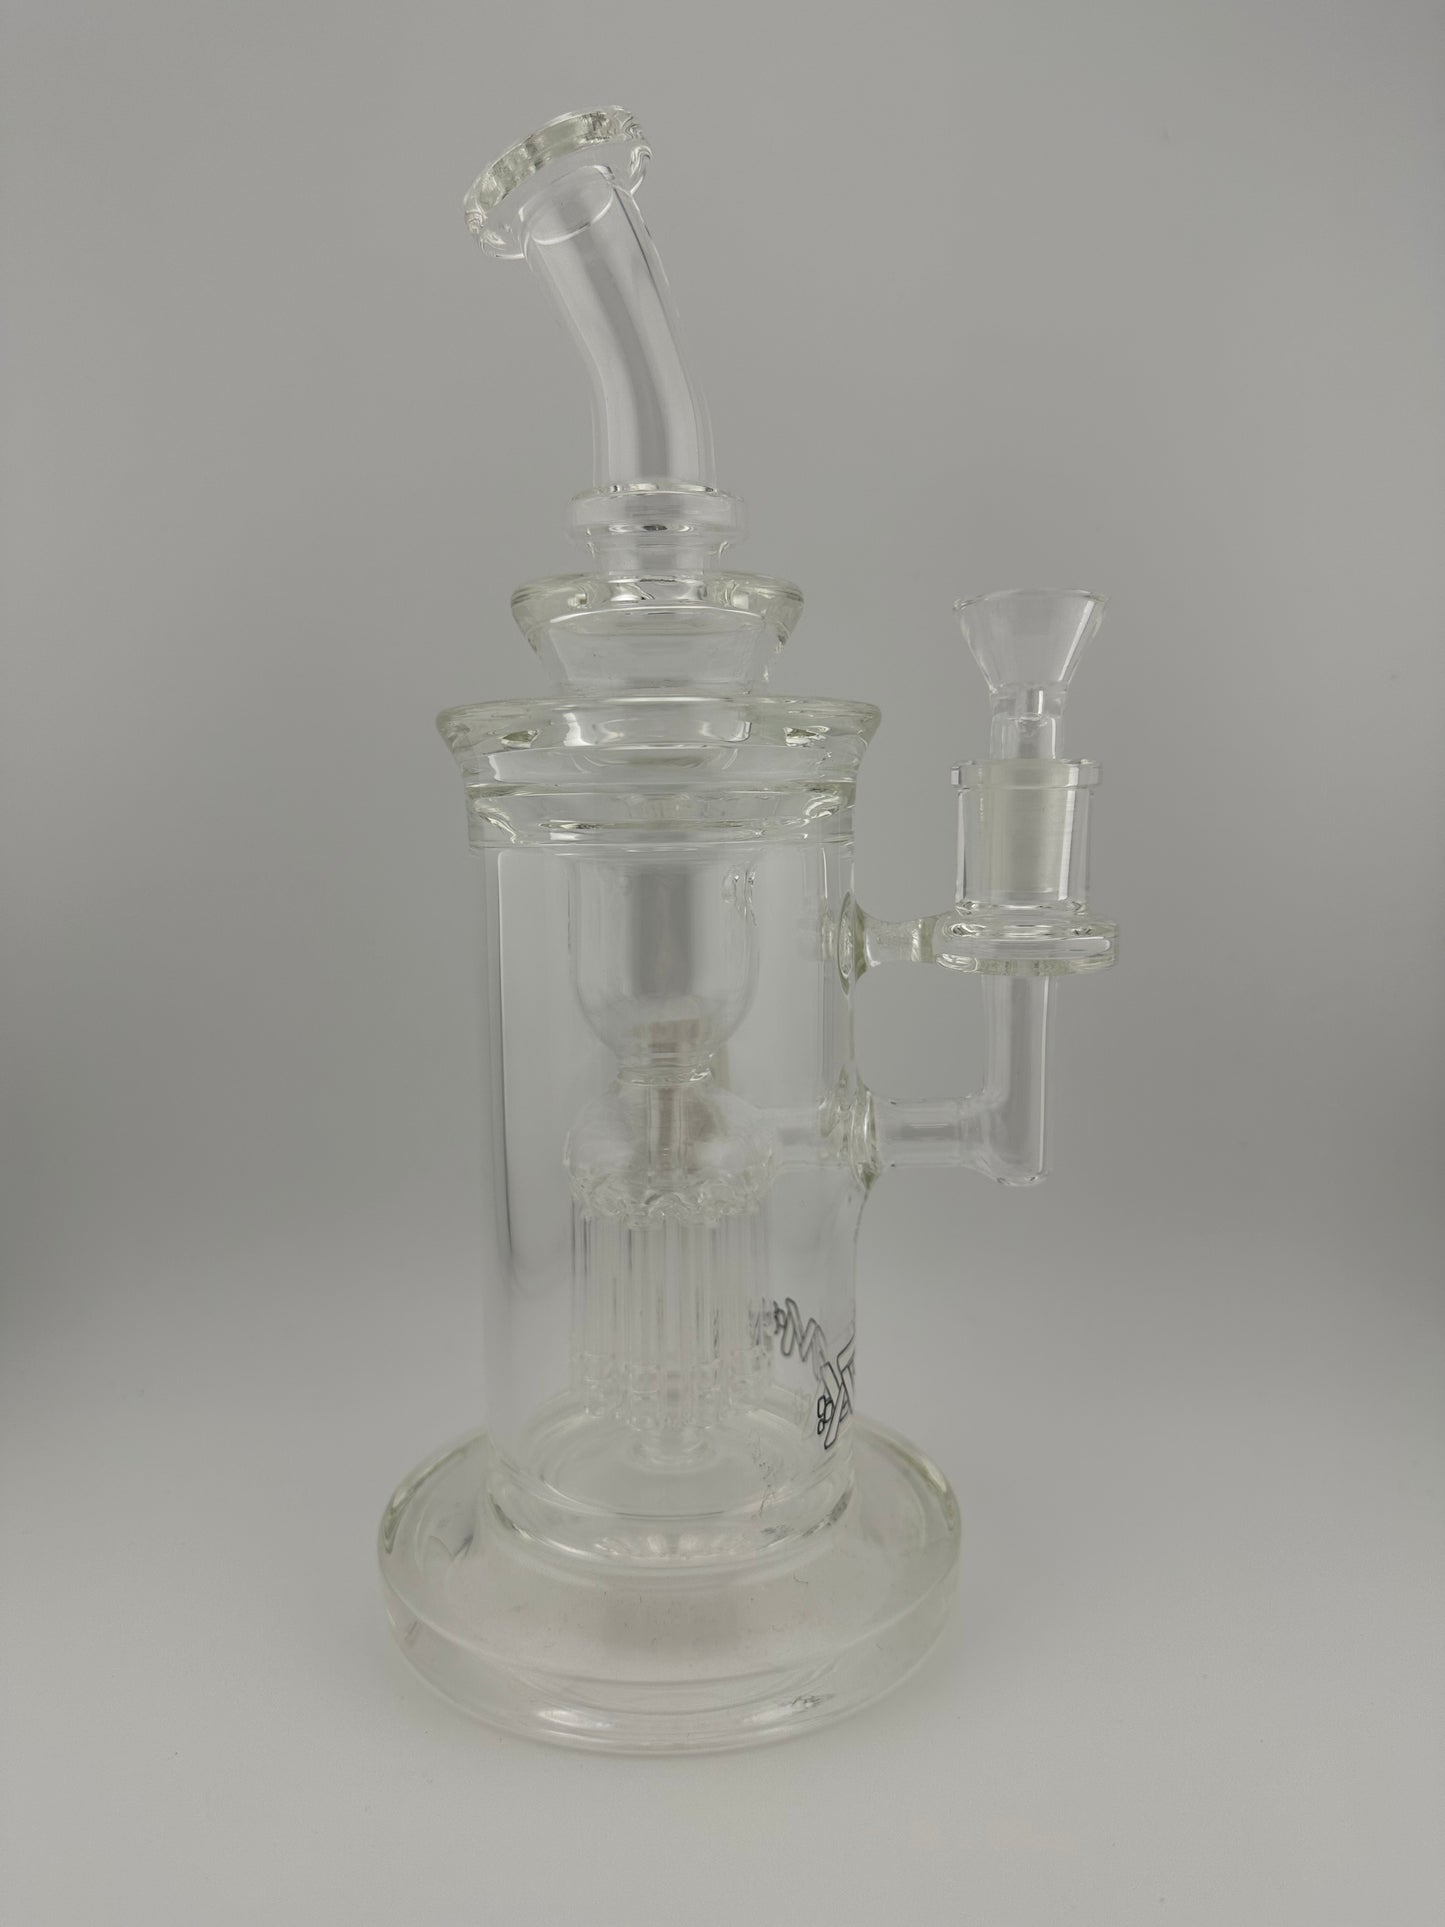 AFM Glass 10" Power Station Incycler NBS038